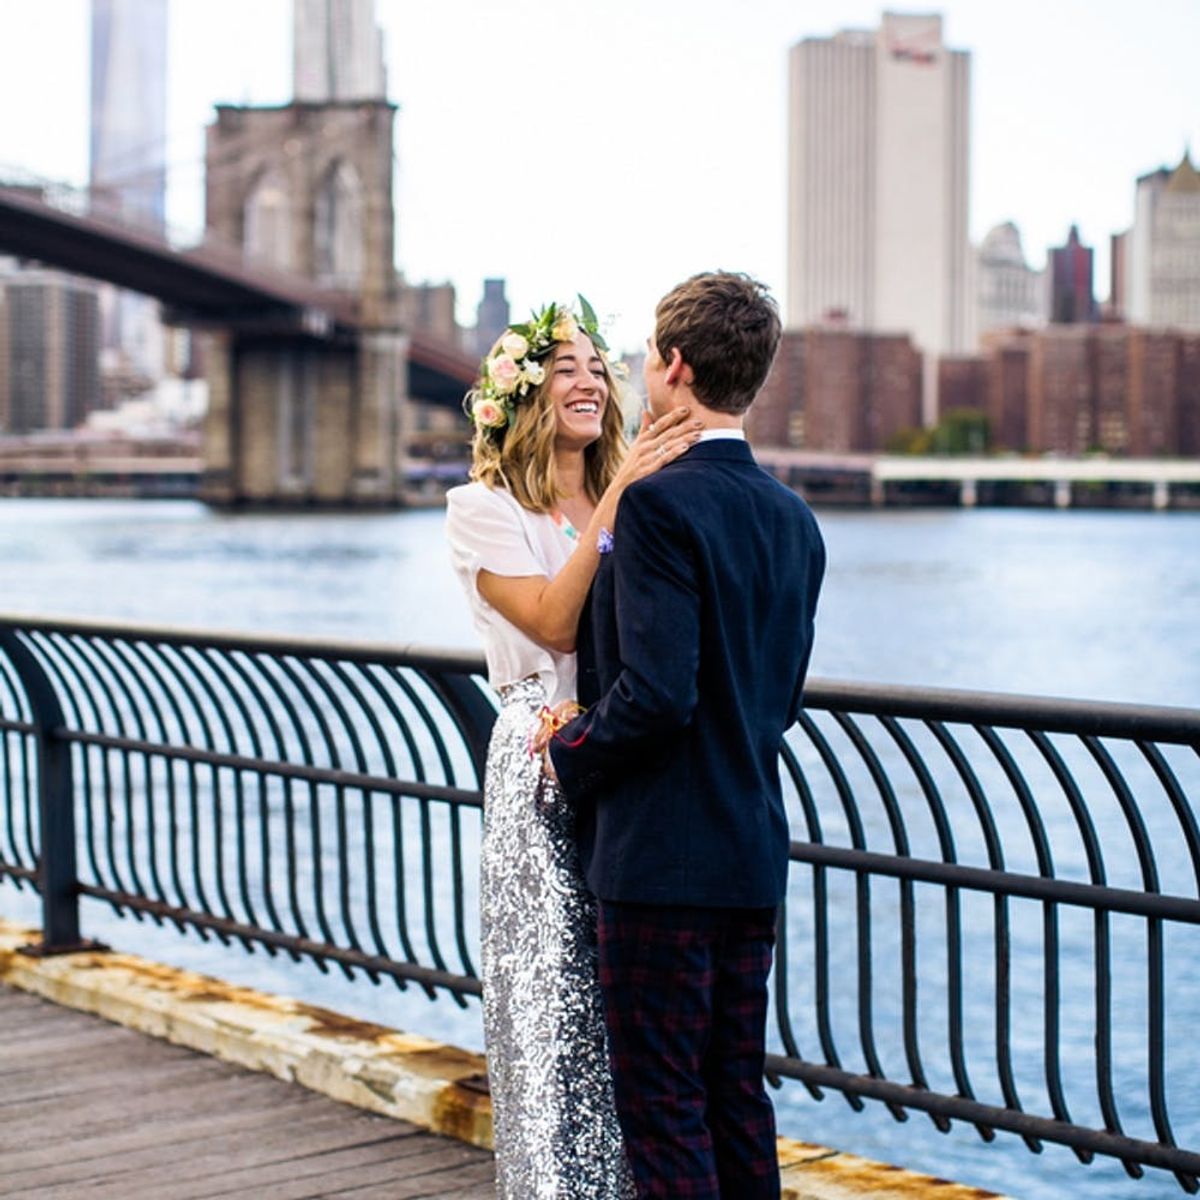 This Sequin-Filled NYC Elopement Is Beyond Dreamy